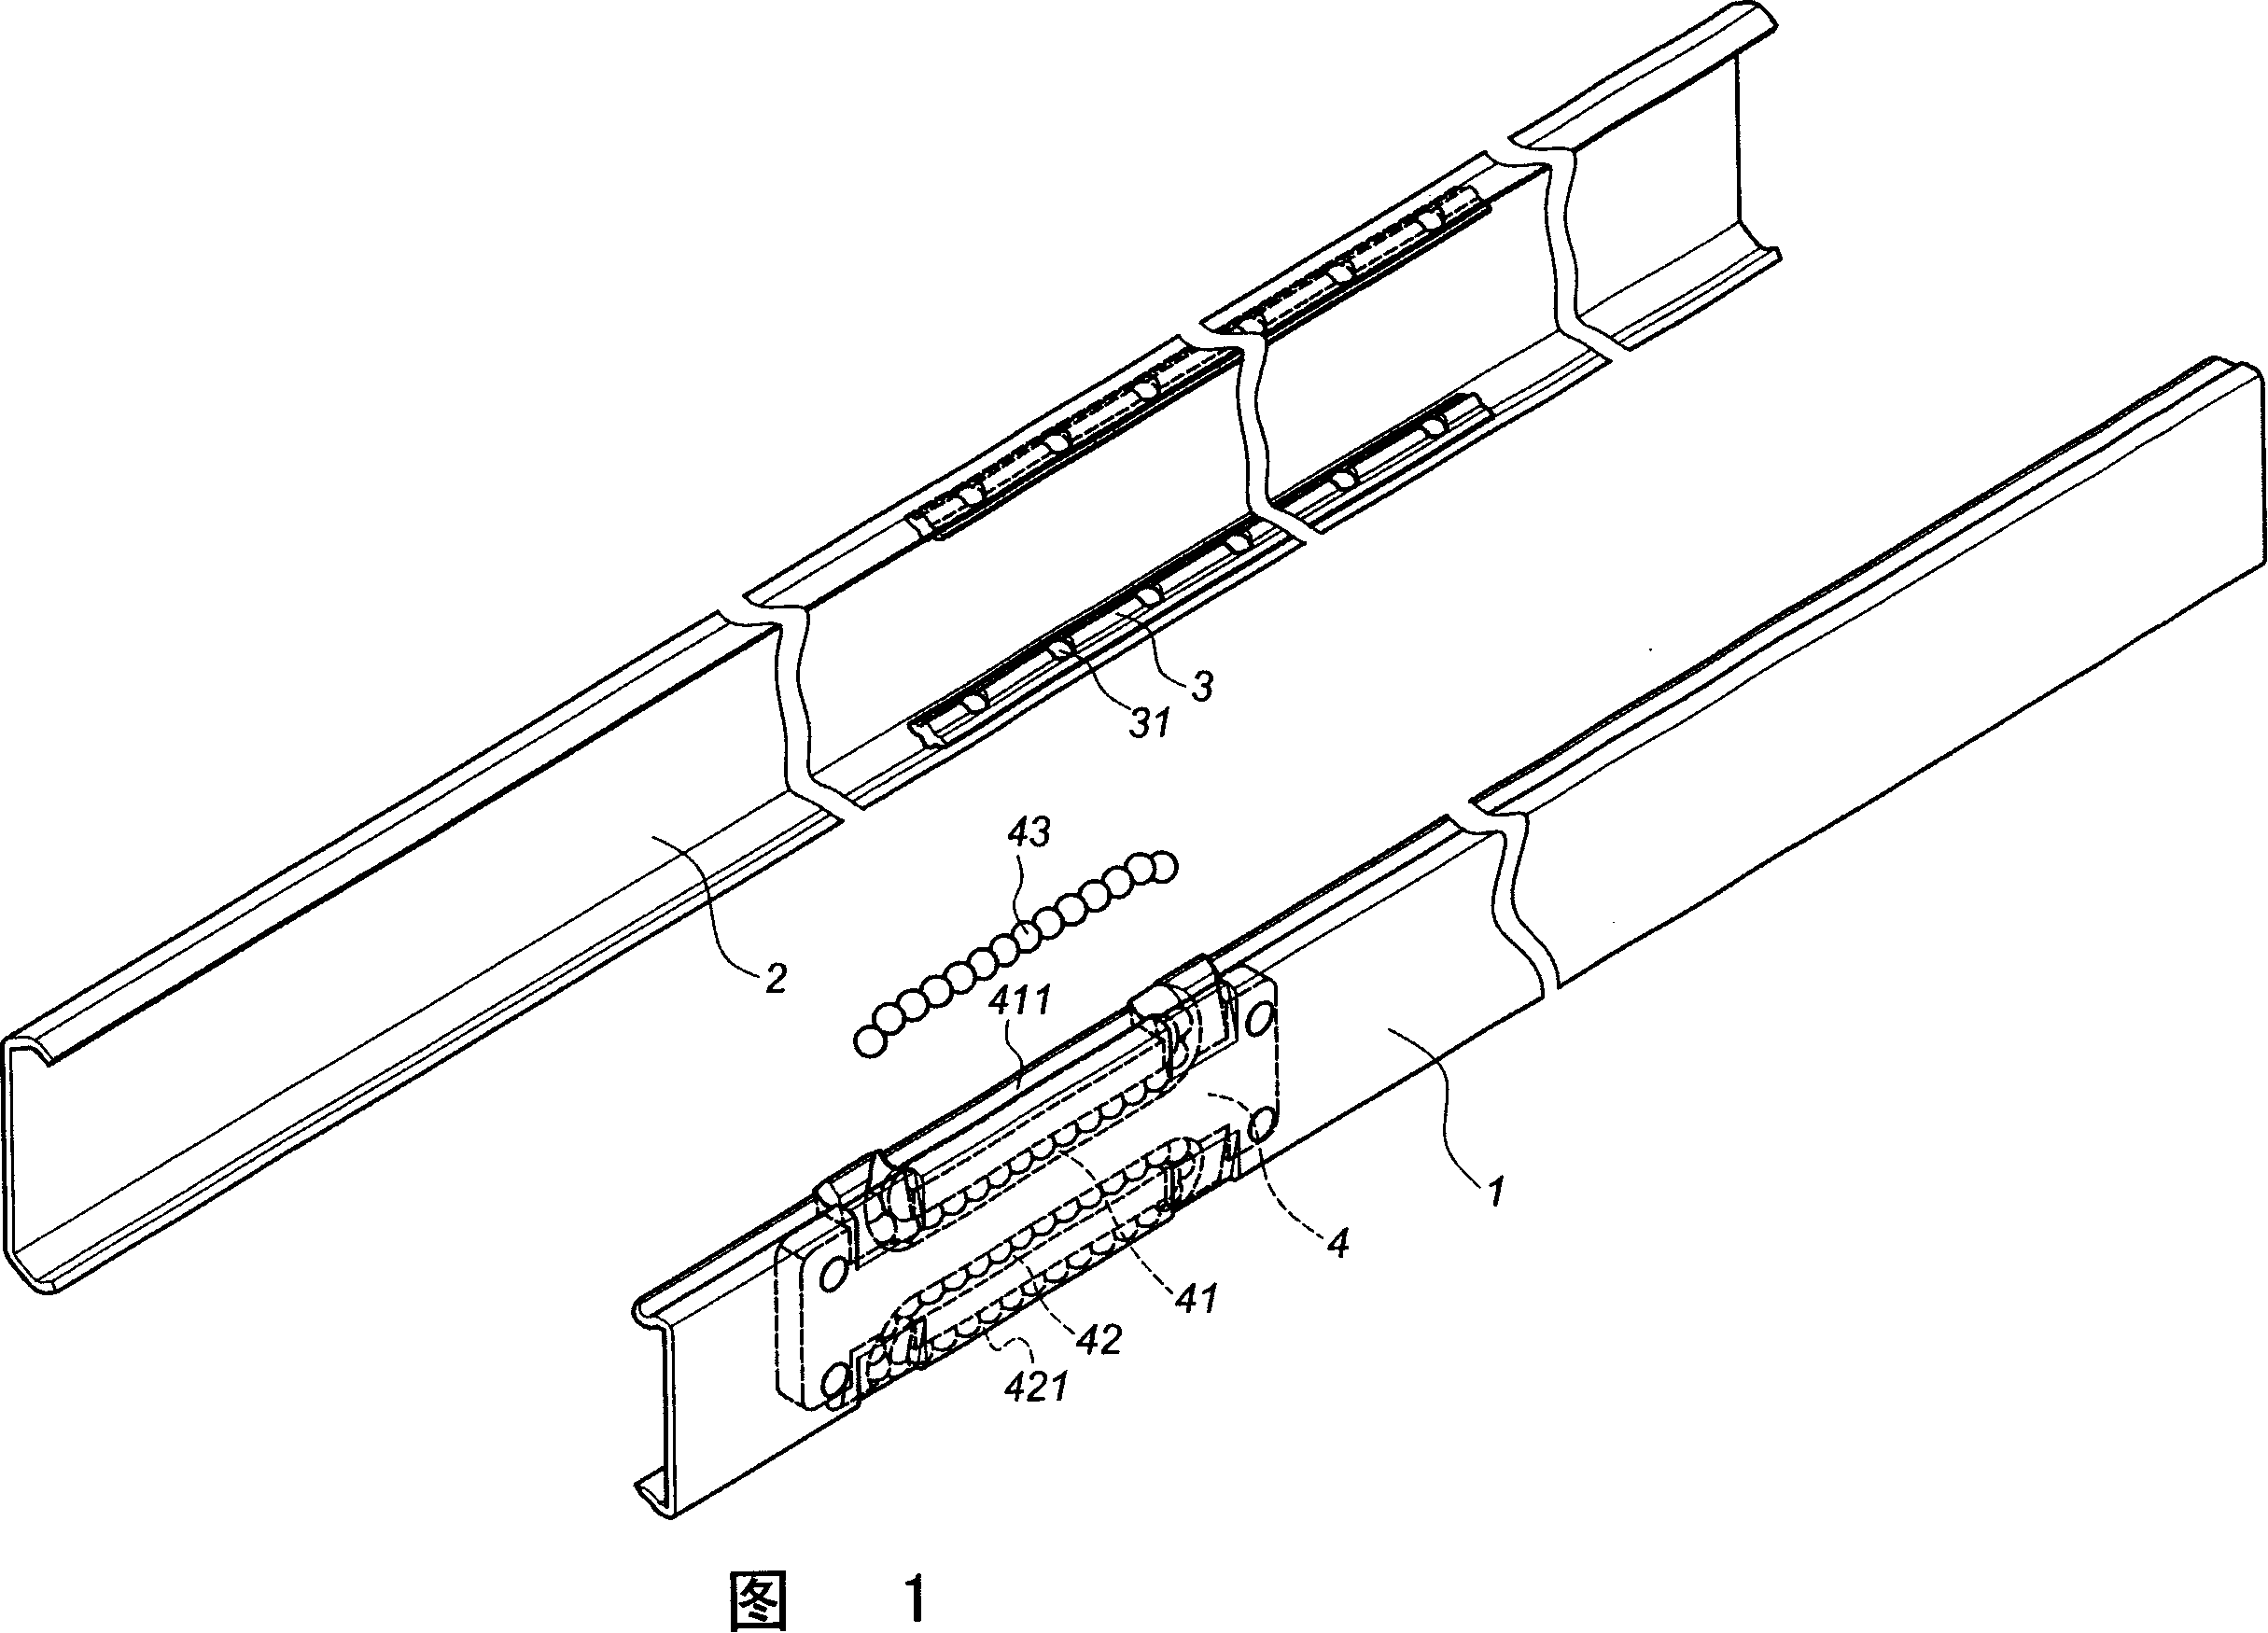 Slide-rail supporting structure